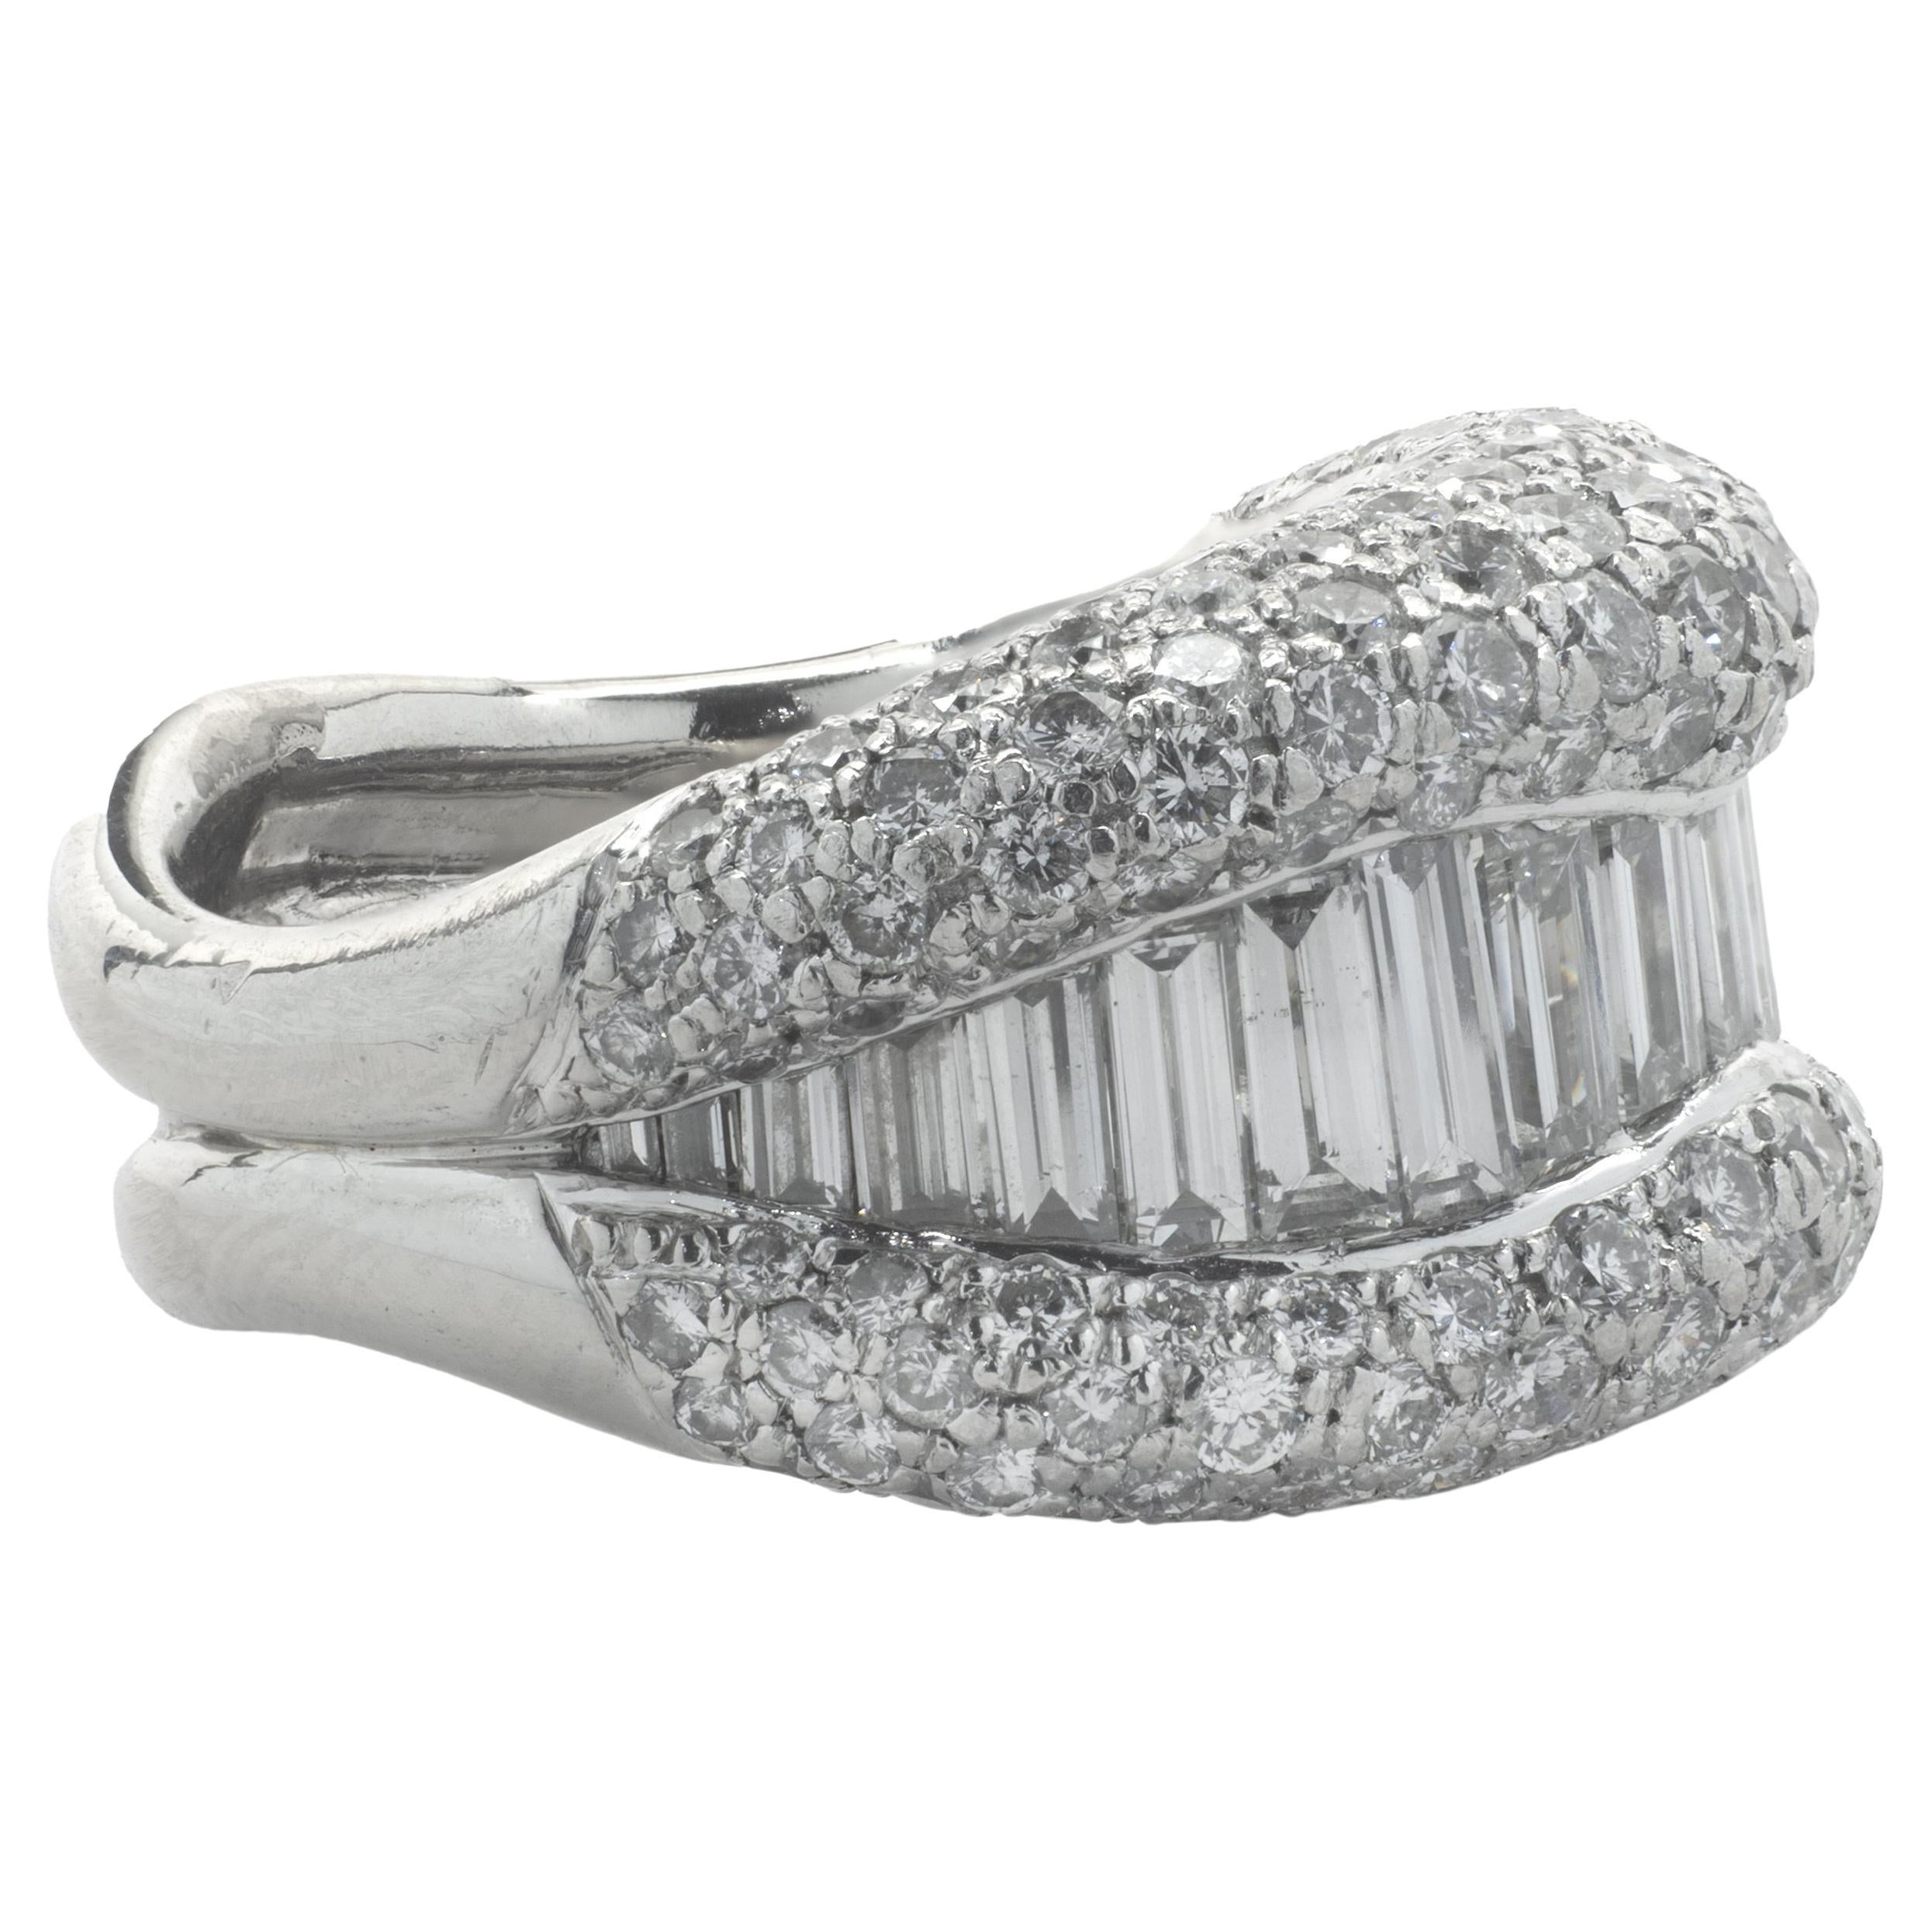 Designer: custom
Material: platinum
Diamond: 168 round brilliant cut = 2.52cttw
Color: G
Clarity: VS2
Diamond: 20 baguette cut = 1.06cttw
Color: G
Clarity: VS2
Ring size: 5.5 (please allow two additional shipping days for sizing requests)
Weight: 